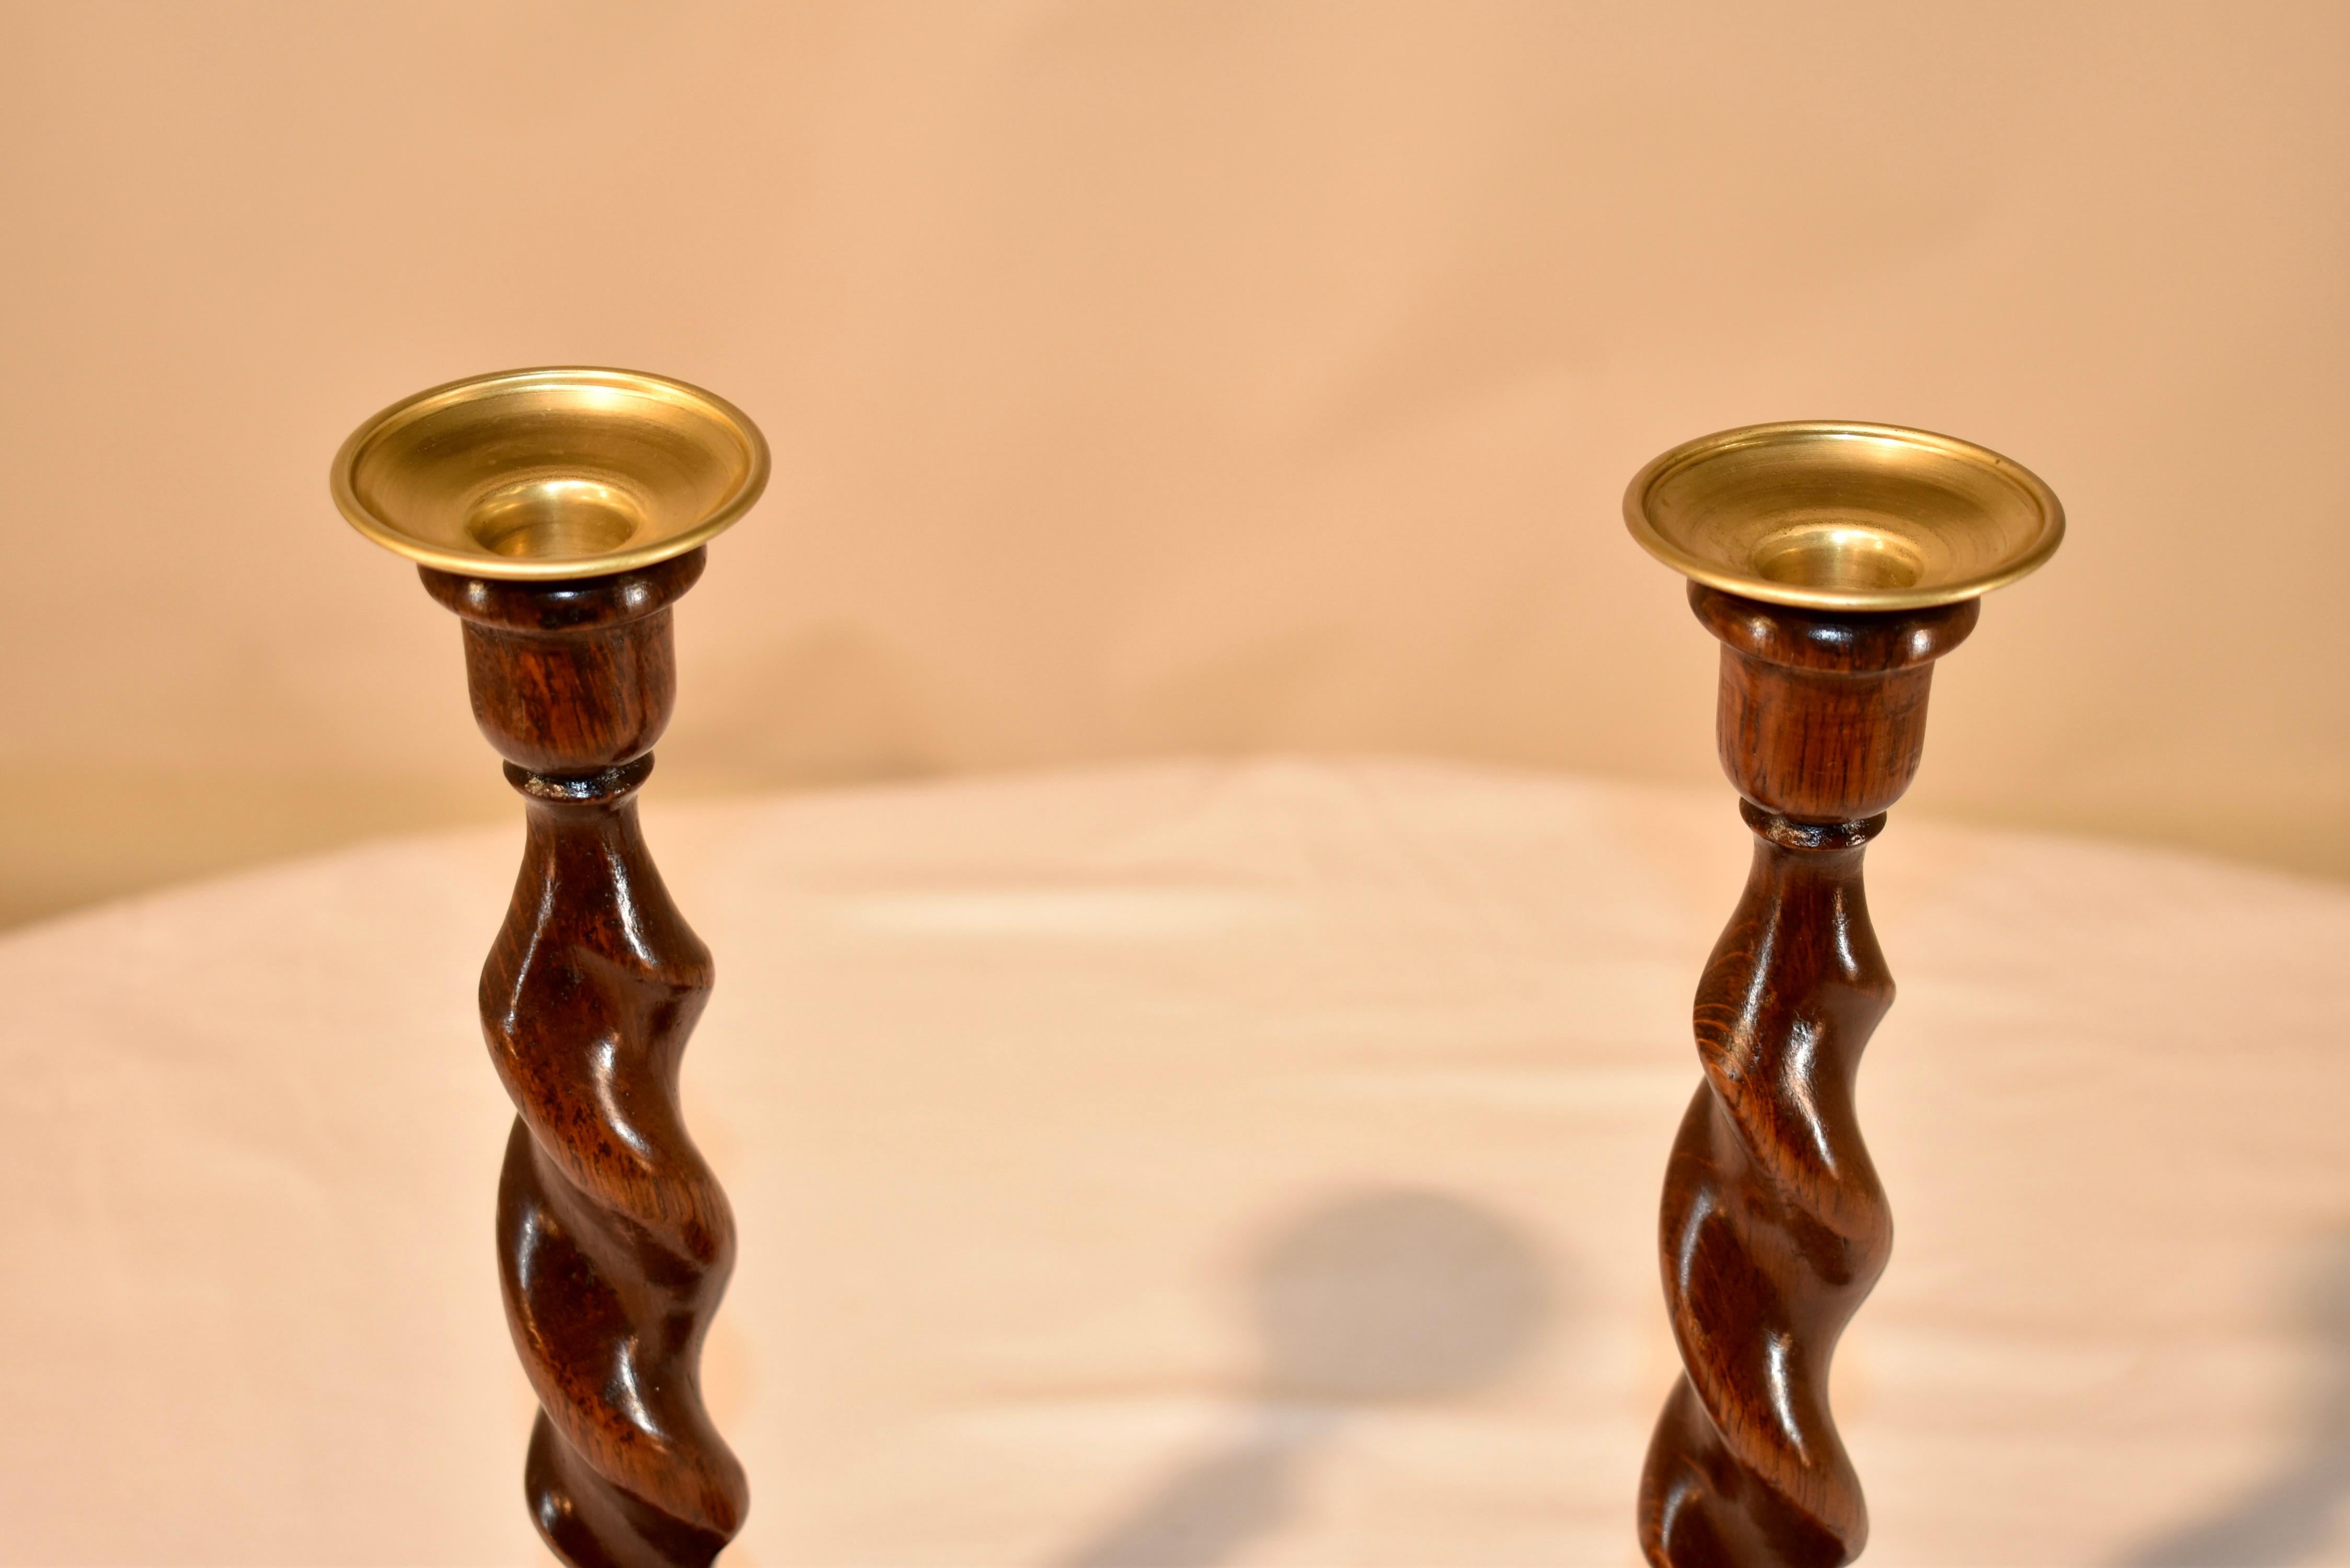 Pair of 19th Century English Candlesticks In Good Condition For Sale In High Point, NC